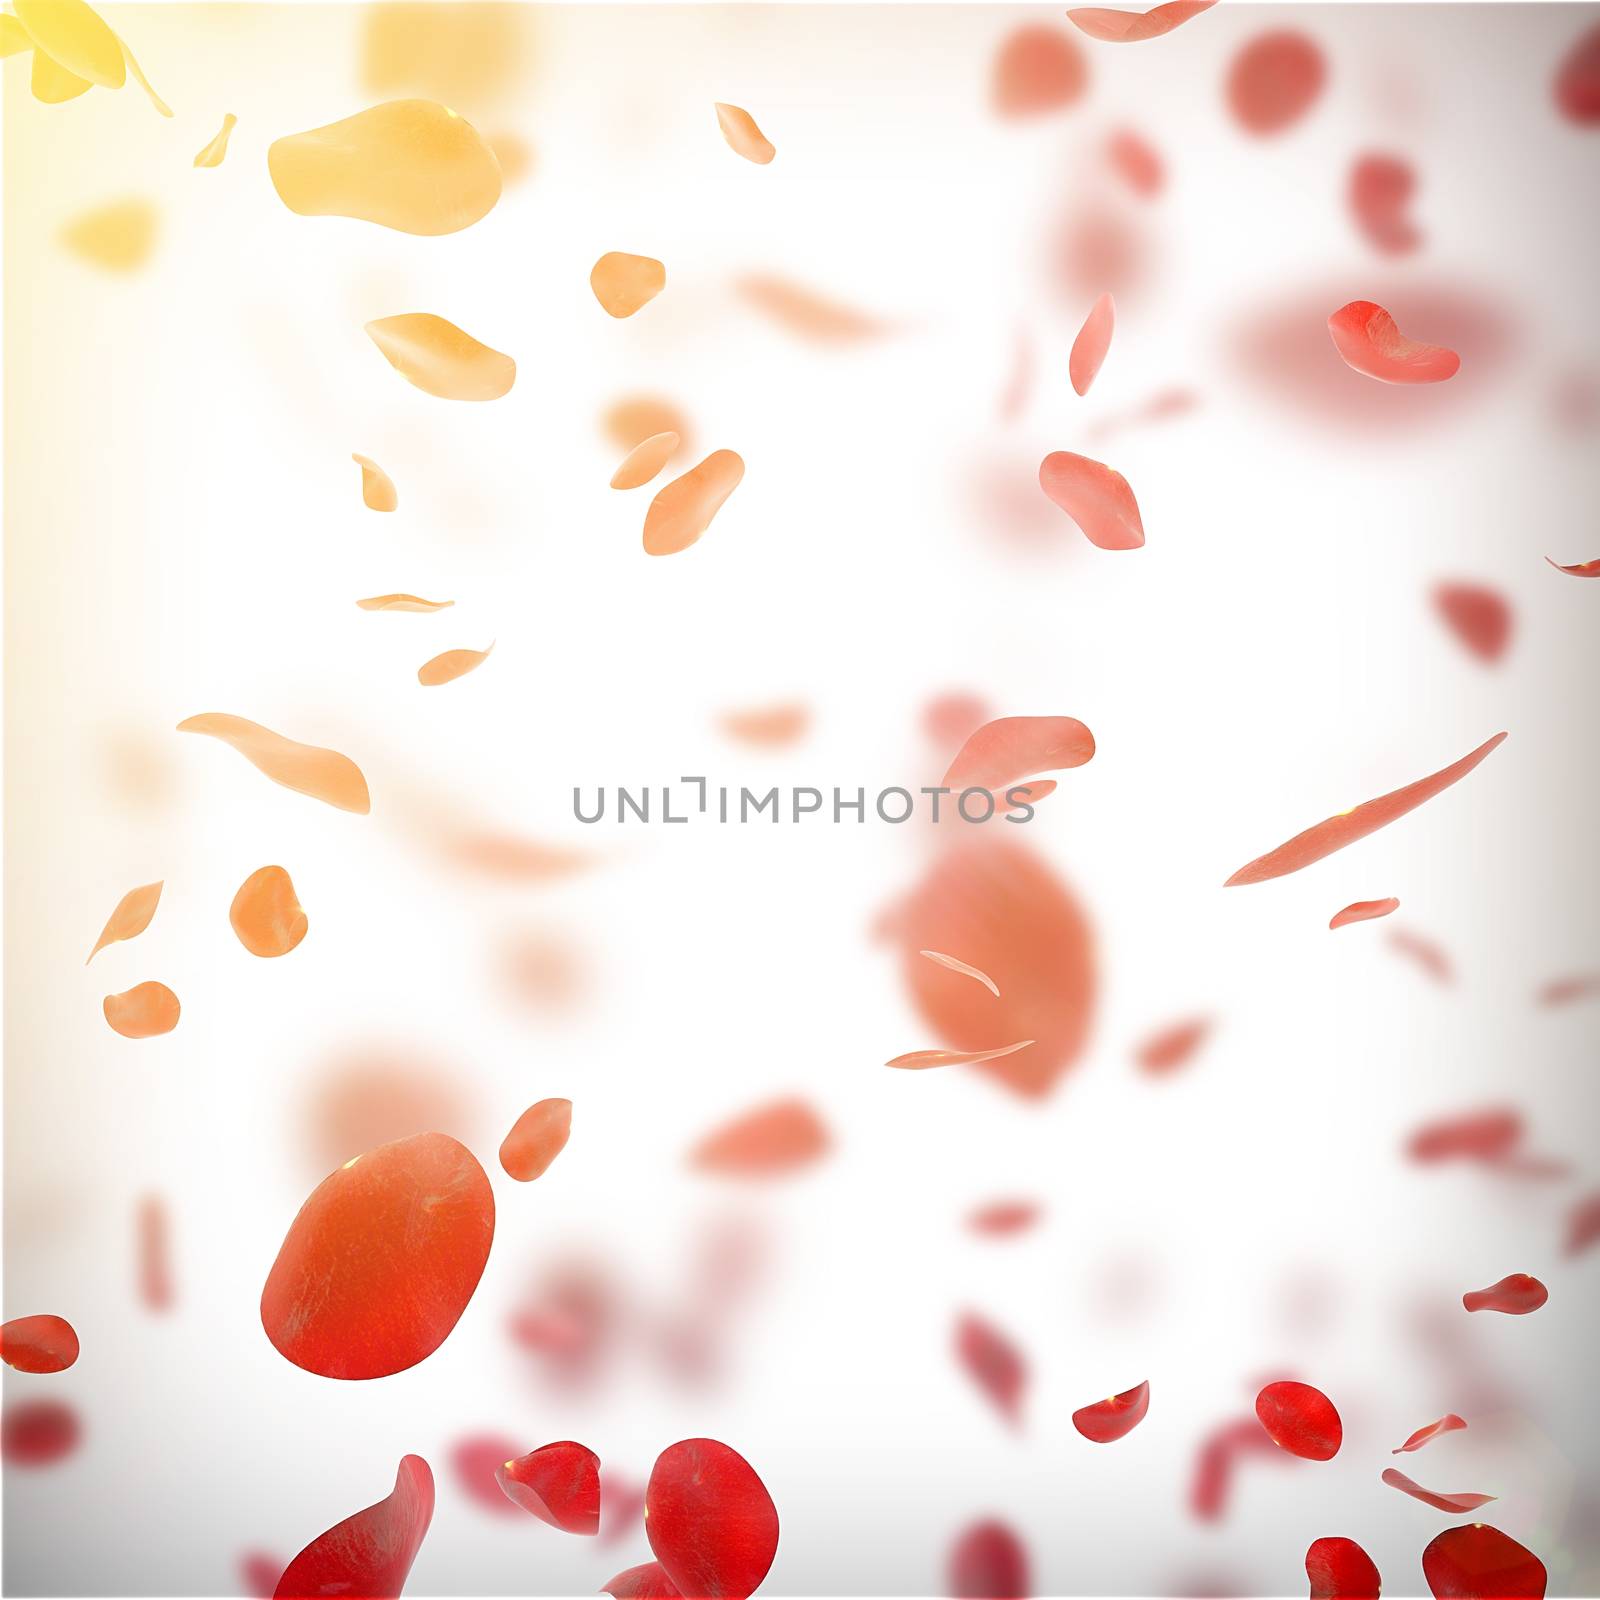 Falling rose petals background with glowing sun by 123dartist